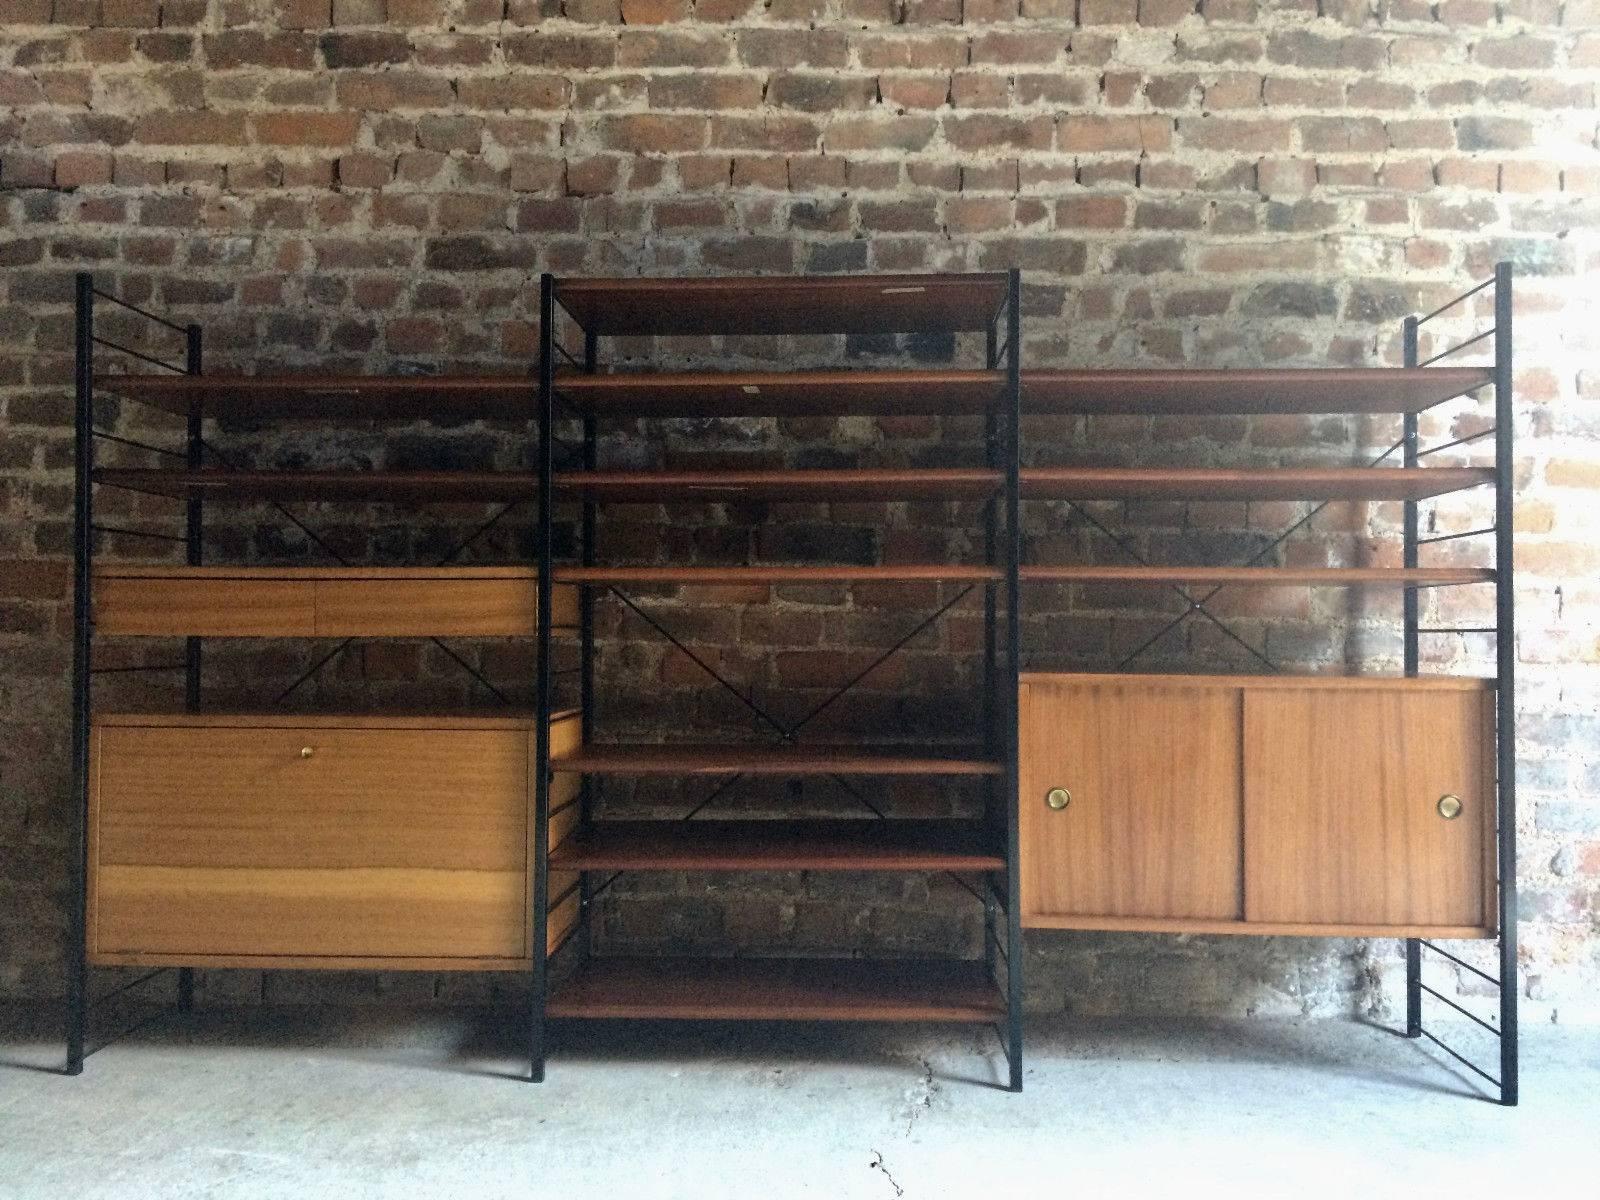 Fabulous midcentury Triple Ladderax style black metal and hardwood shelving unit, circa 1970s, completely dismantles and can be configured to any way you want.

Please note: that this item will be delivered completely dismantled.